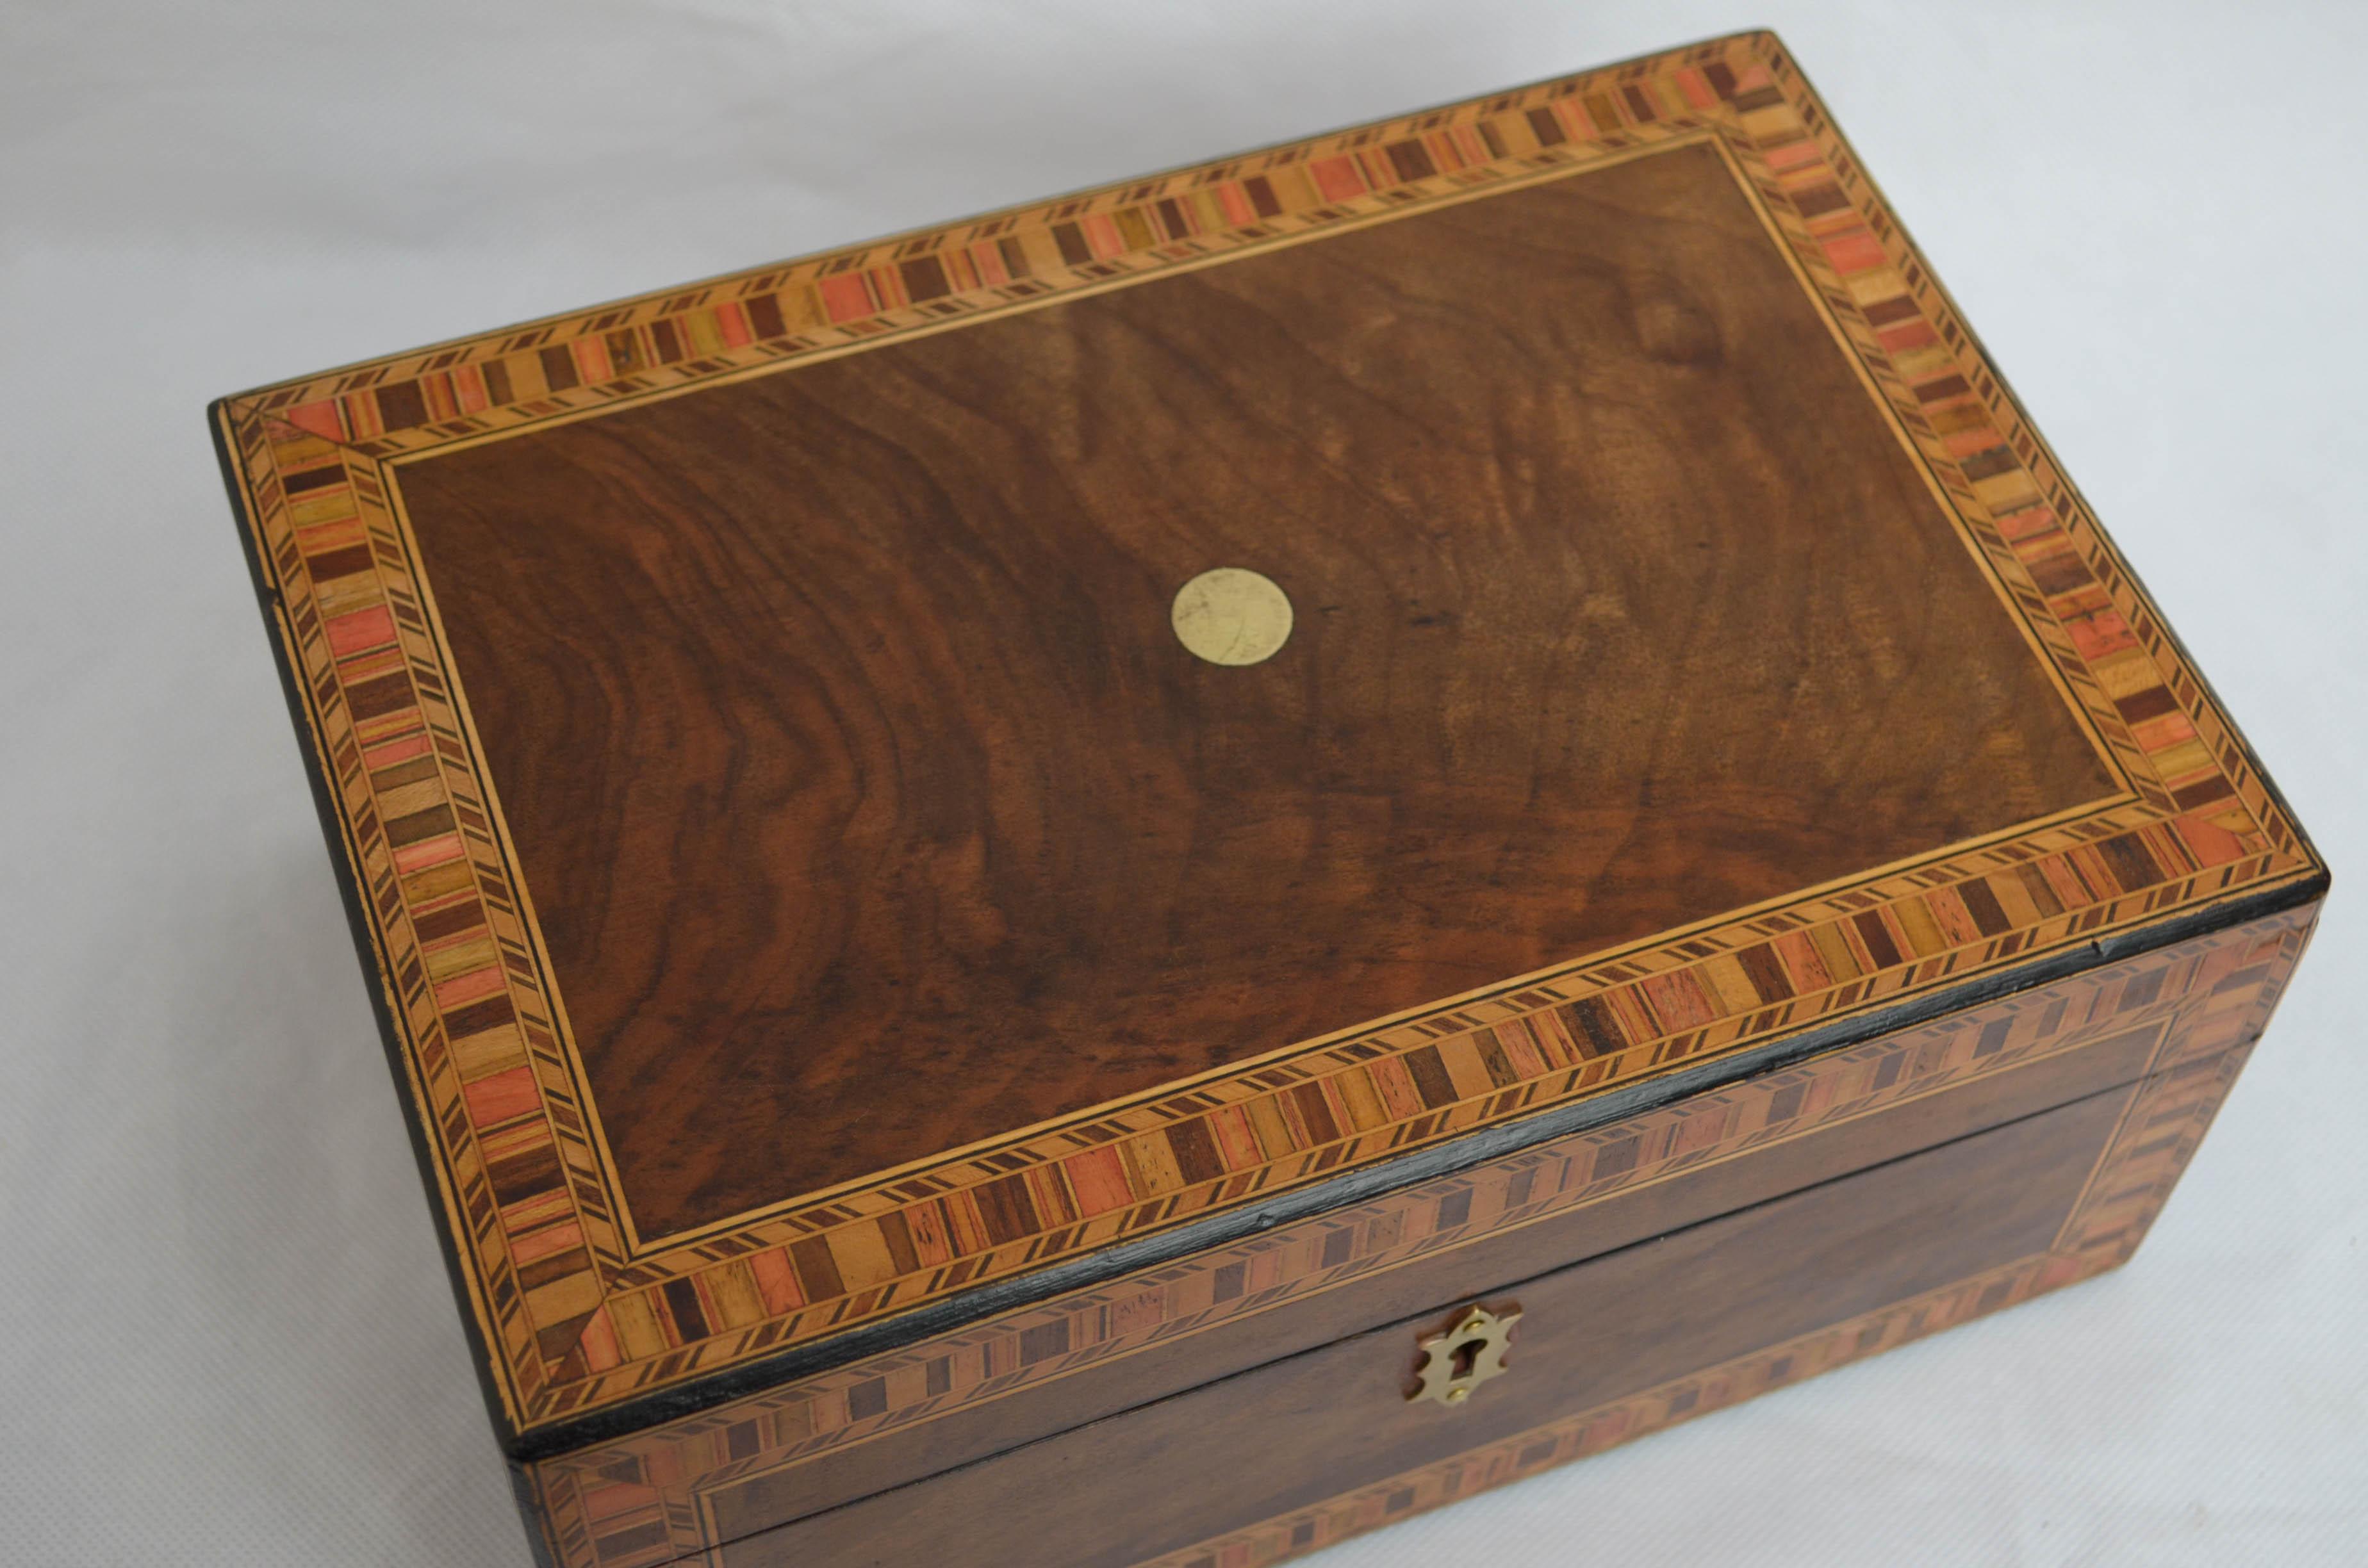 K0479 Very attractive Victorian figured walnut jewelry box, having Tunbridge ware inlaid to the front and hinged lid which opens to reveal newly lined interior with lift up tray. This antique box has been sympathetically restored and is in home